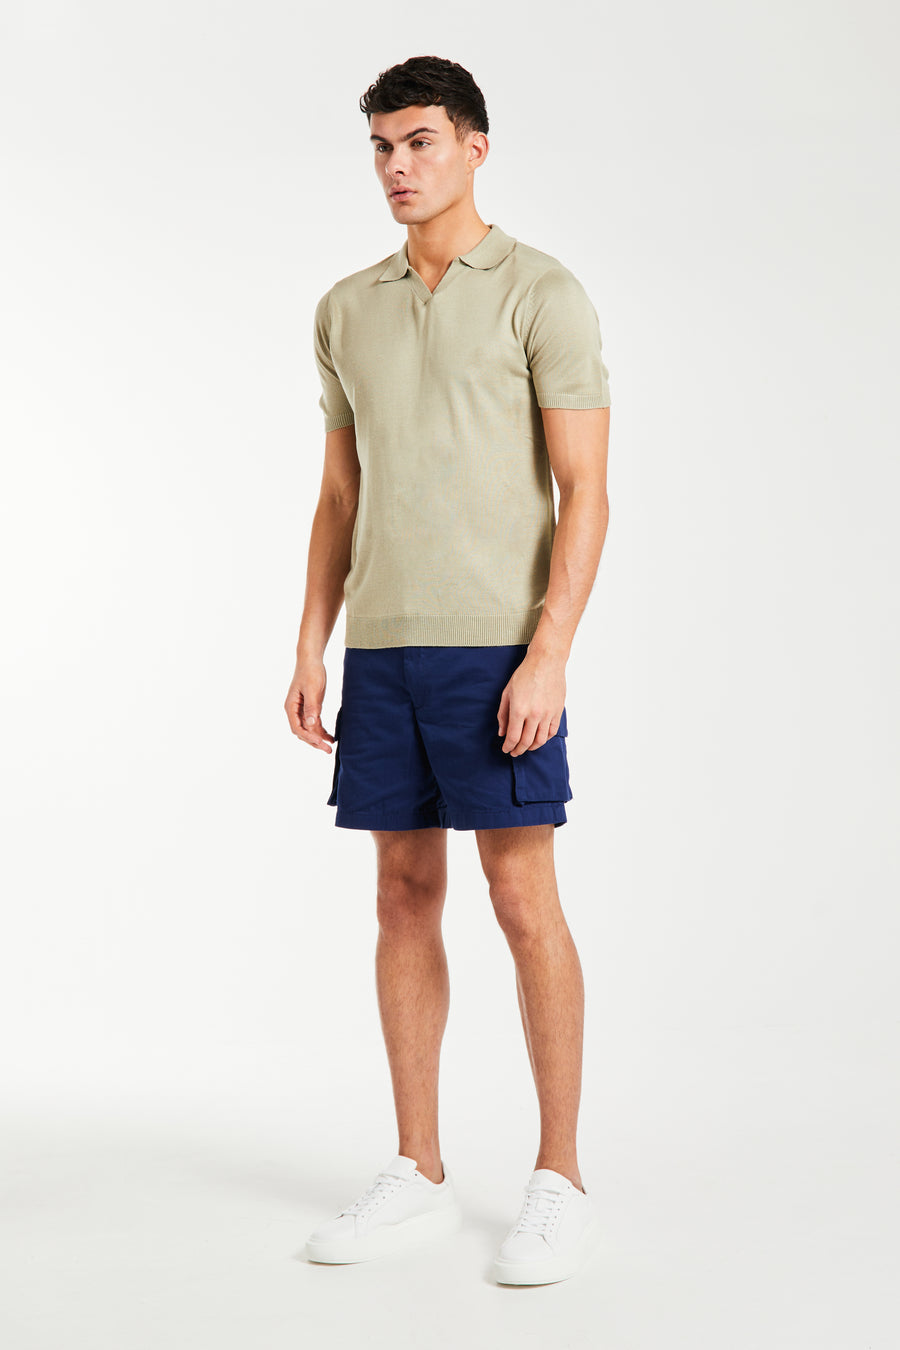 Beige v-neck men's knitted polo styled with shorts